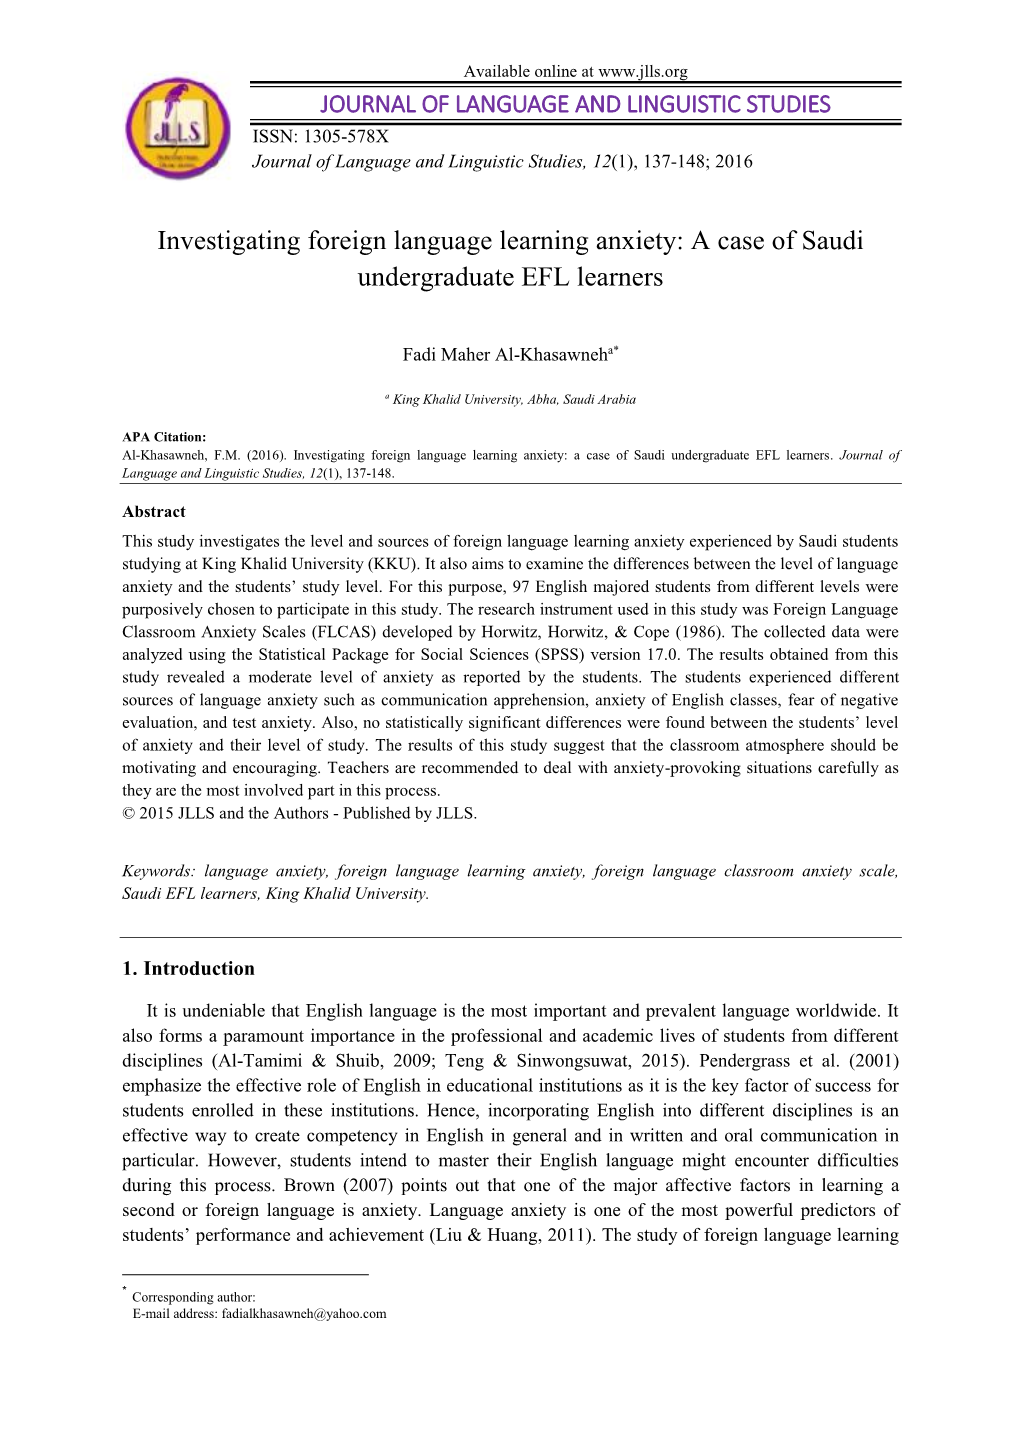 Investigating Foreign Language Learning Anxiety: a Case of Saudi Undergraduate EFL Learners